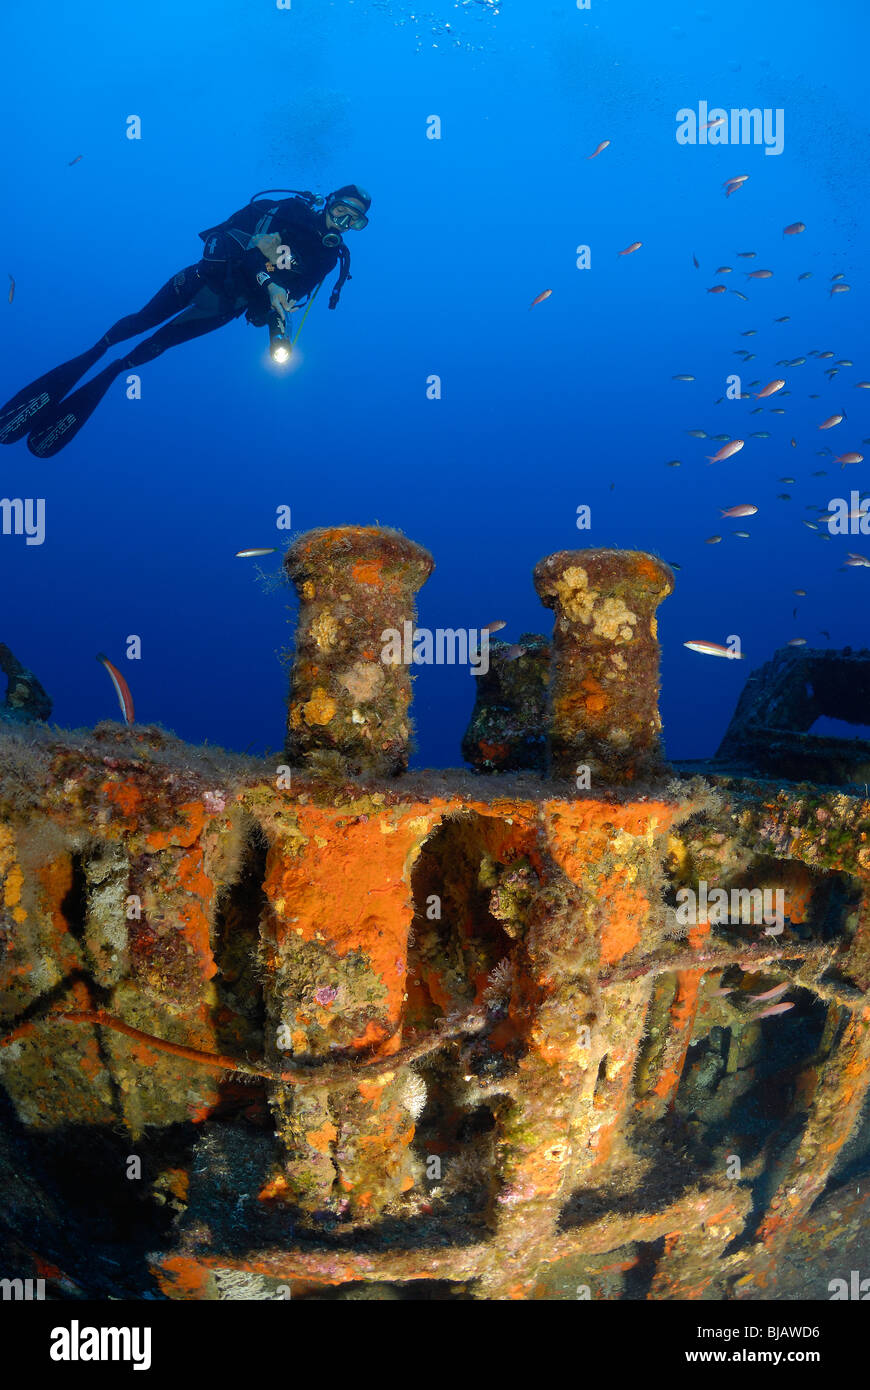 Diver scuba diving on the Rubis wreck in the Mediterranean Sea Stock Photo